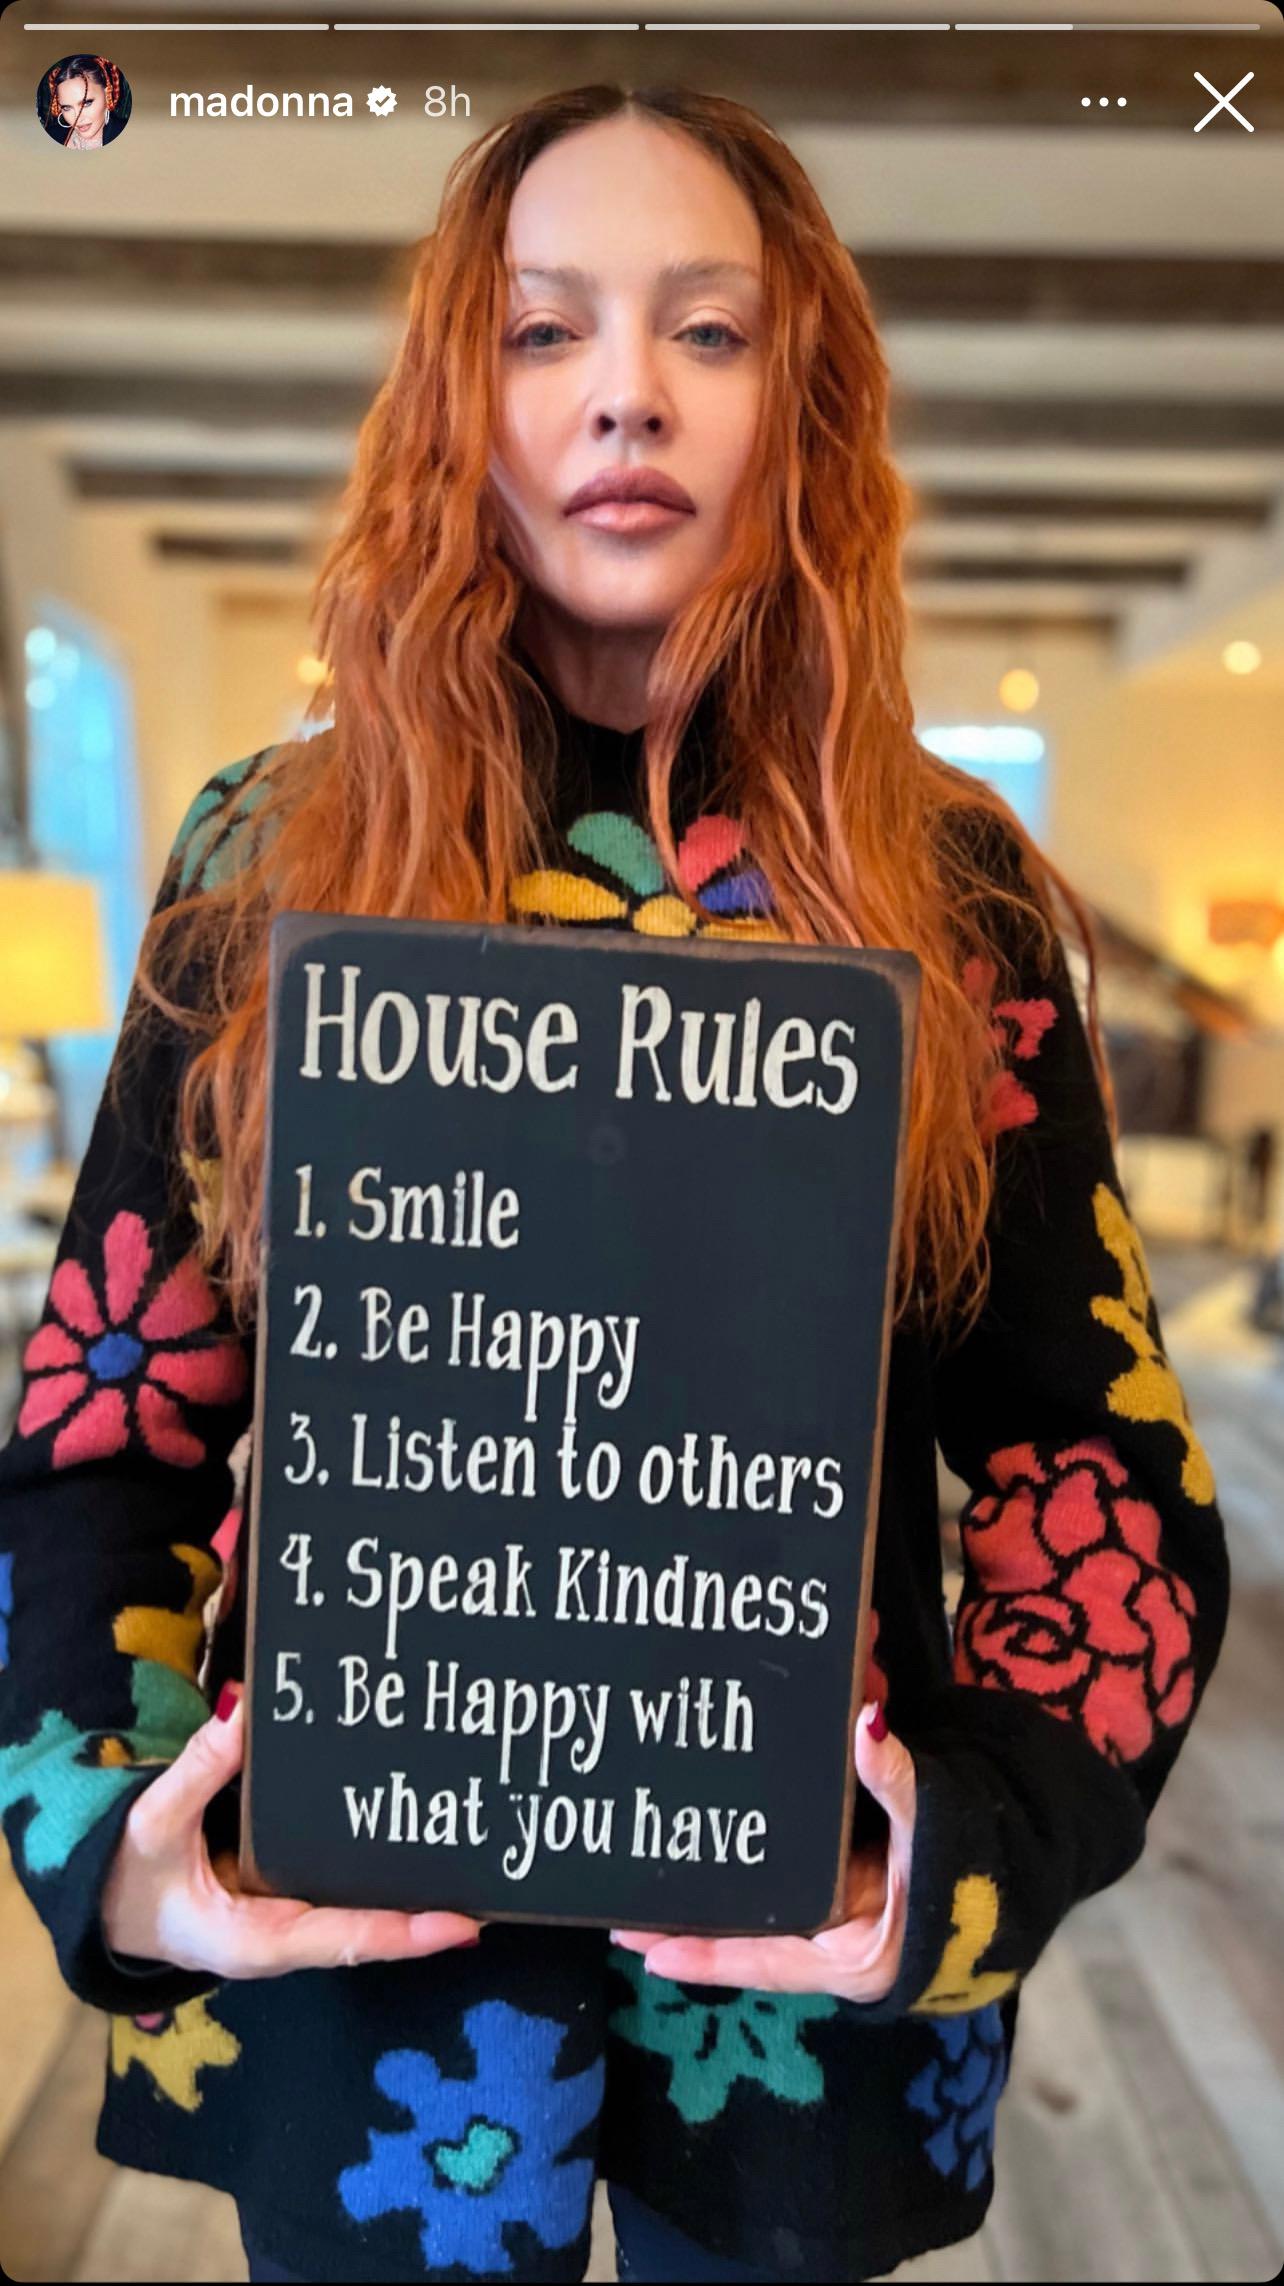 See Madonna Hold Up Sign For Her Family's House Rules